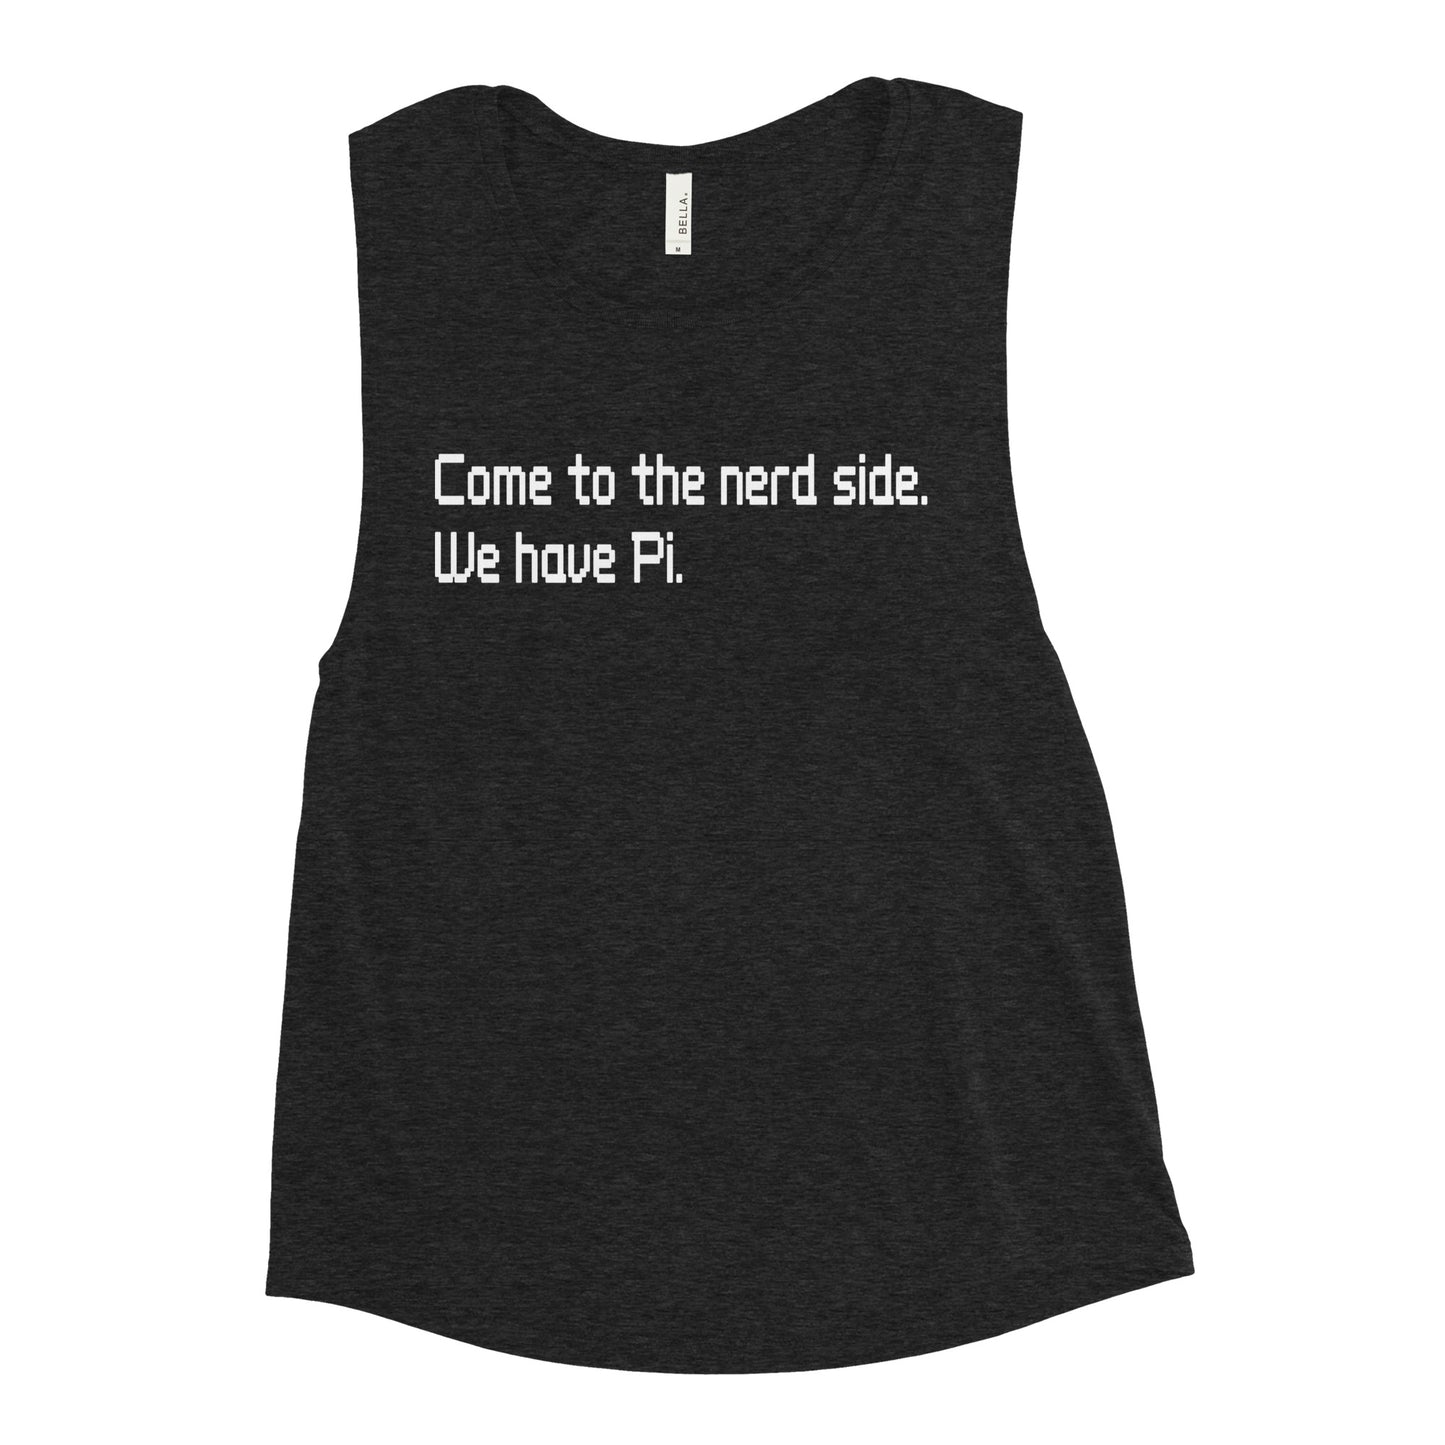 Come To The Nerd Side. We Have Pi. Women's Muscle Tank